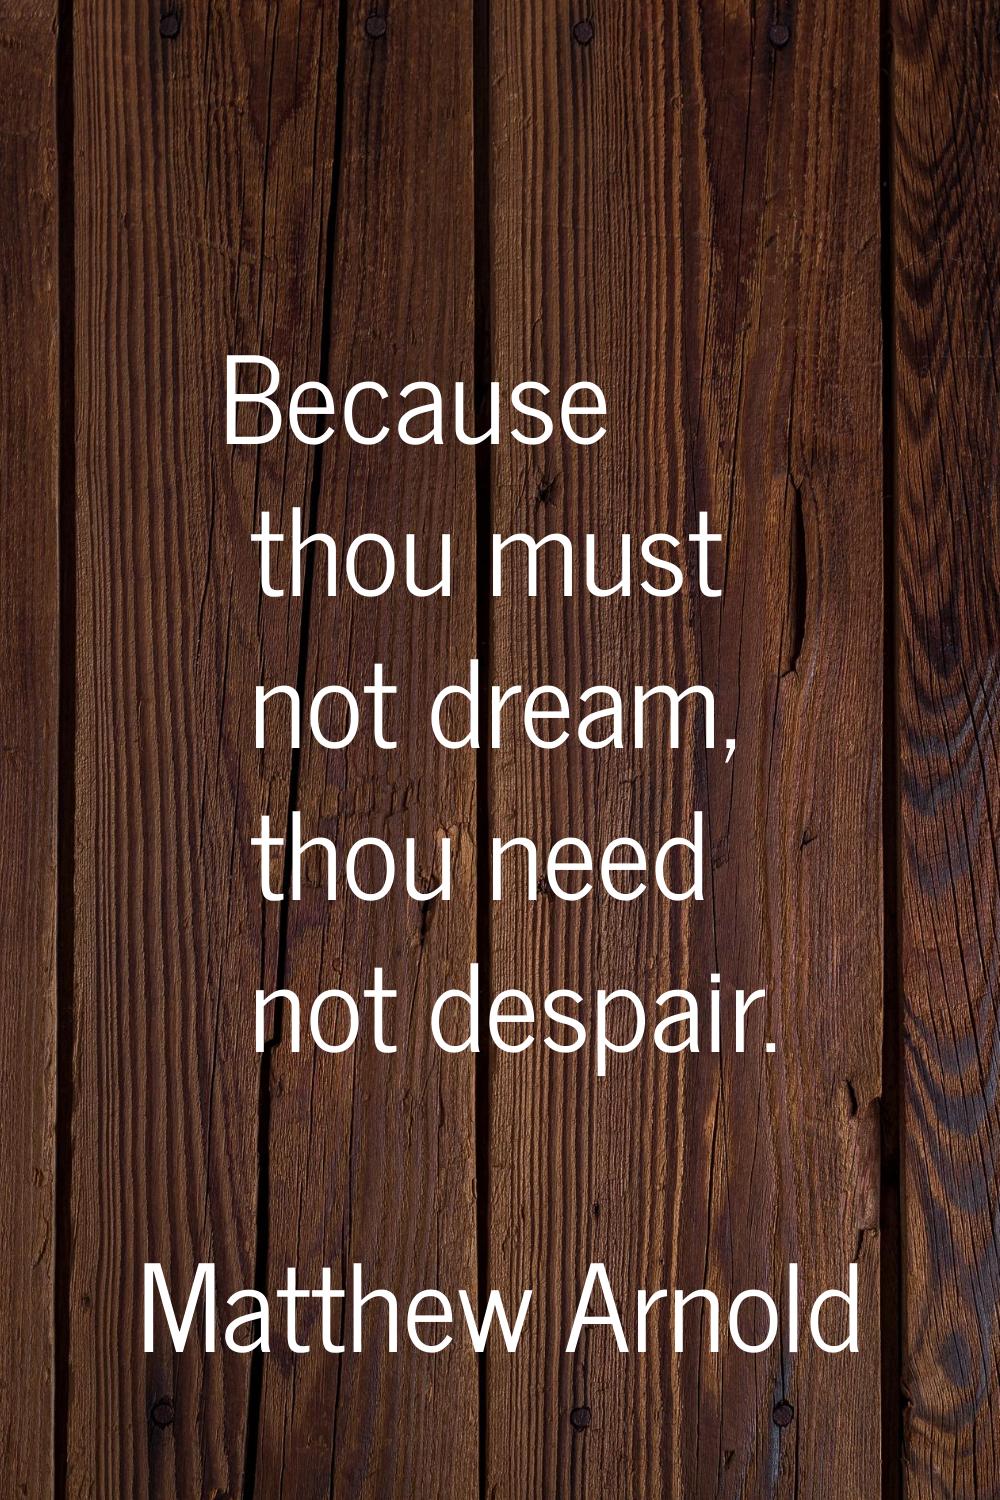 Because thou must not dream, thou need not despair.